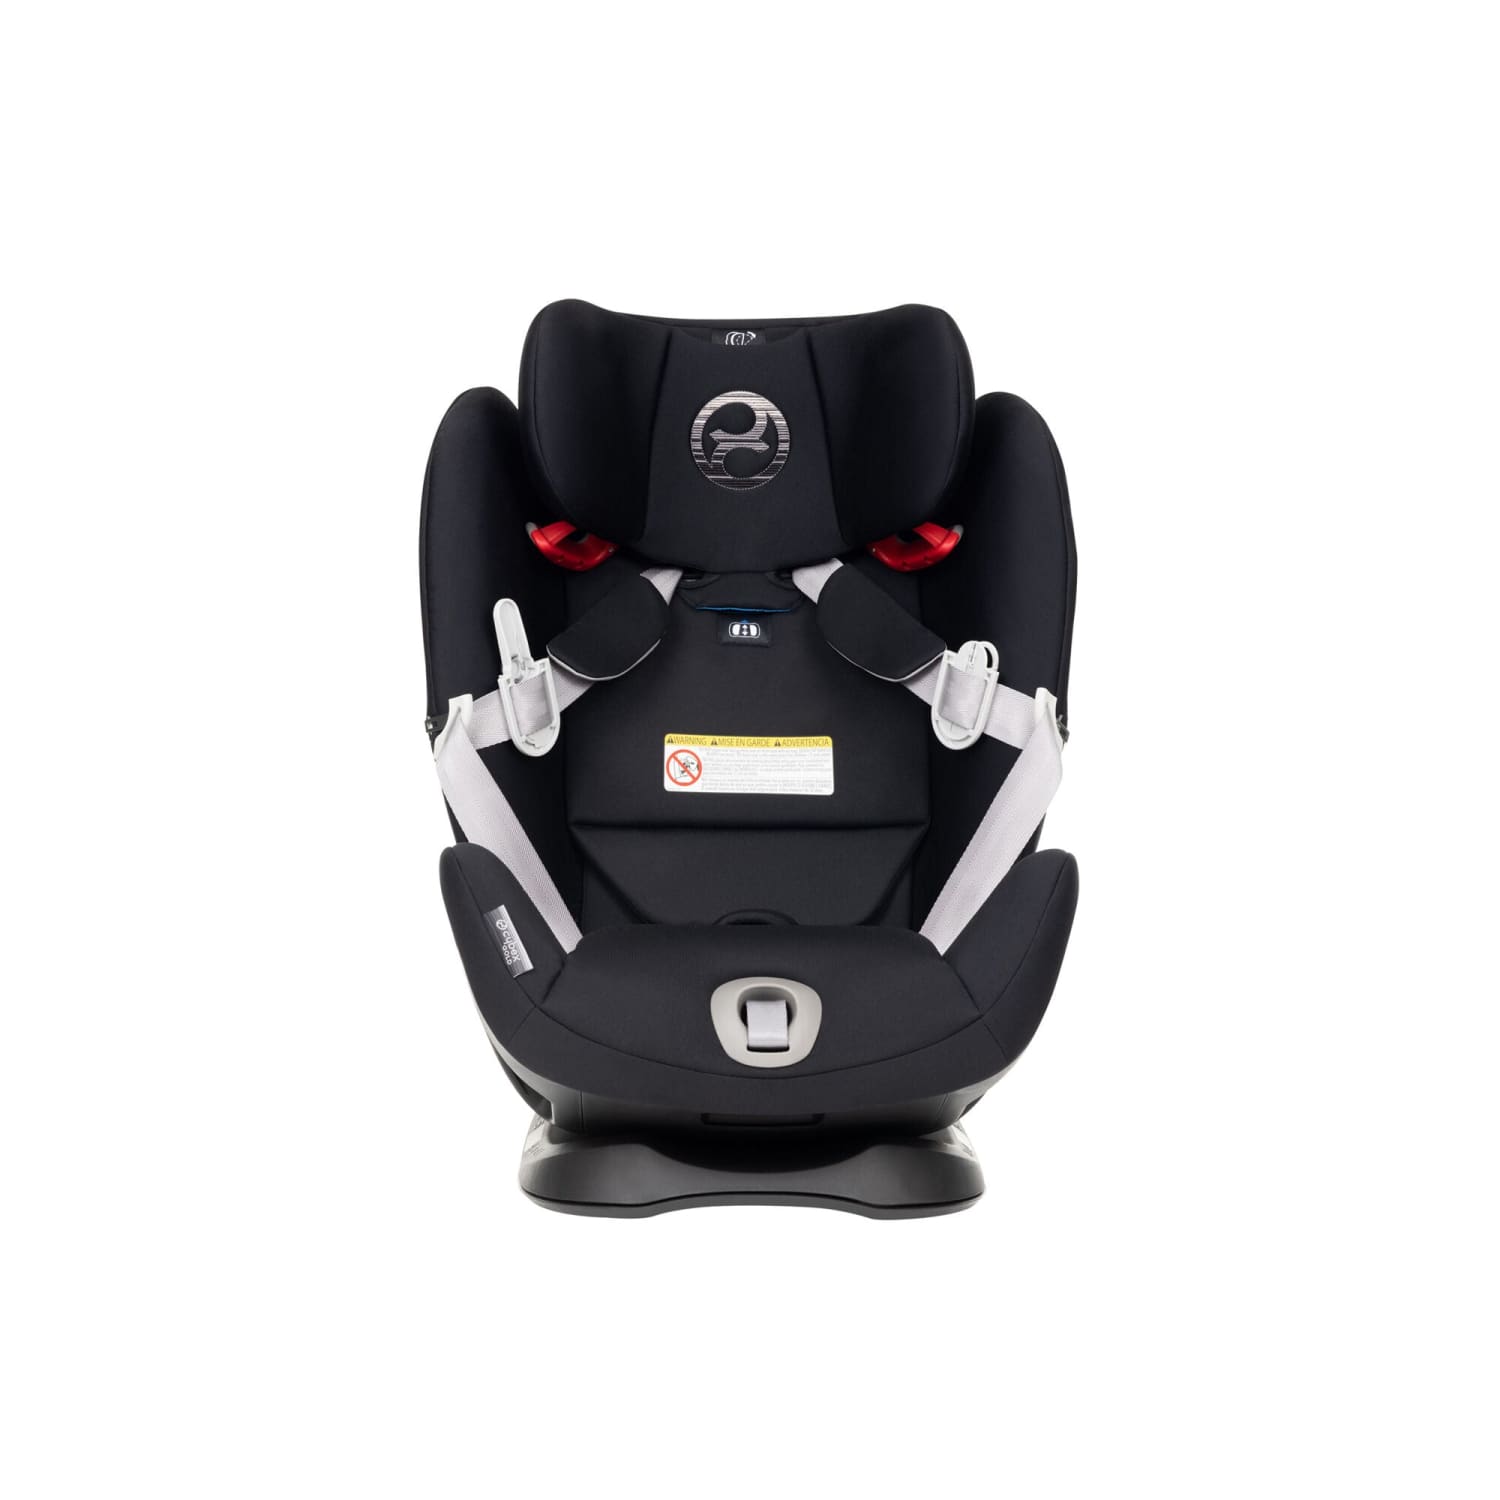 Cybex Eternis S All-in-One Convertible Car Seat with 